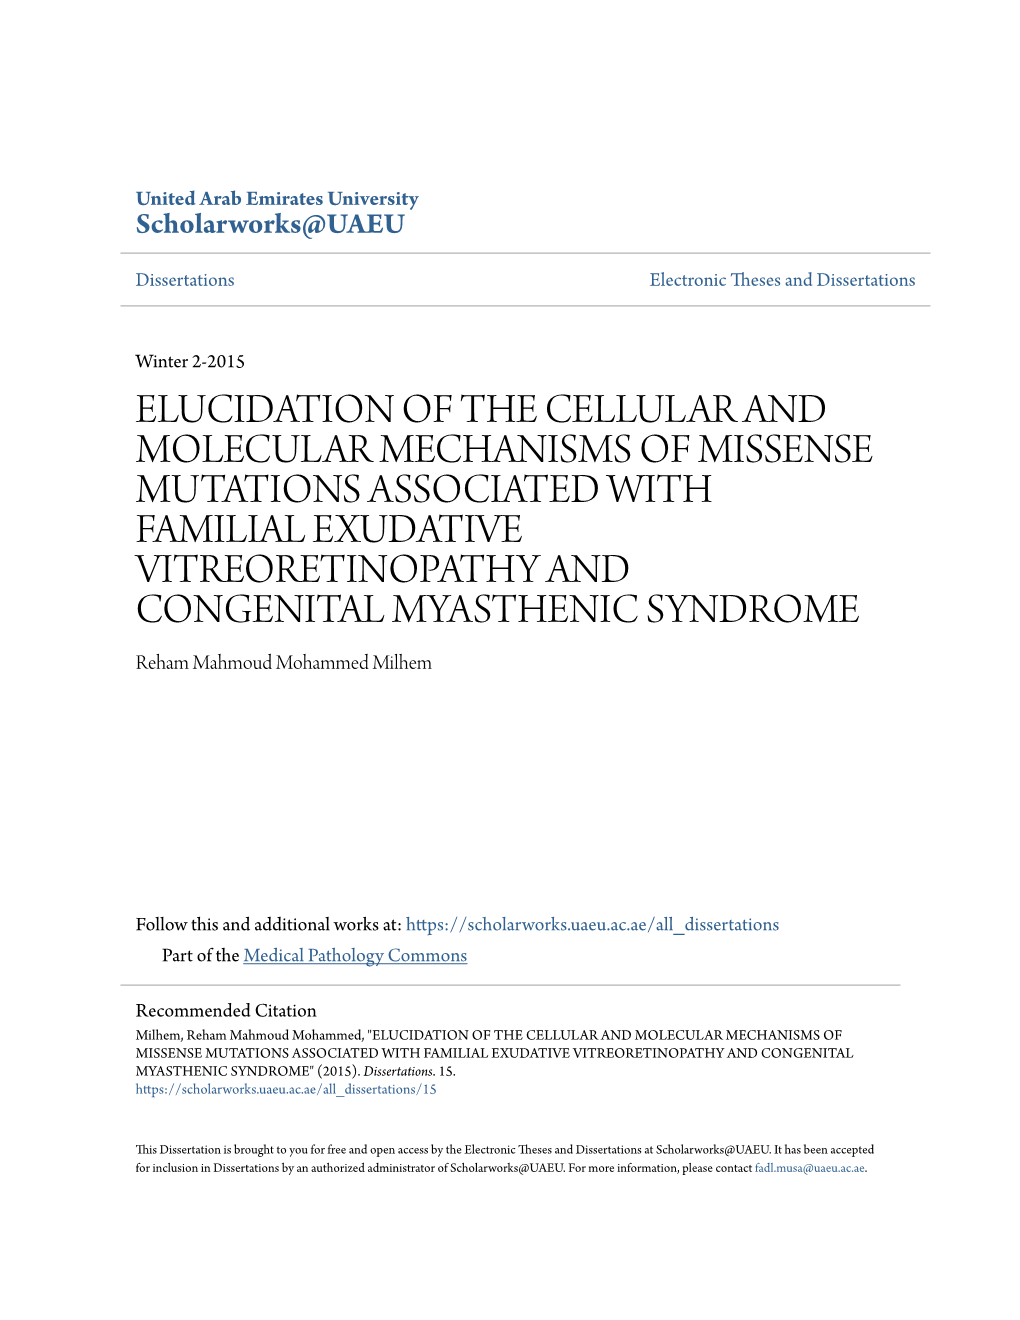 Elucidation of the Cellular and Molecular Mechanisms Of